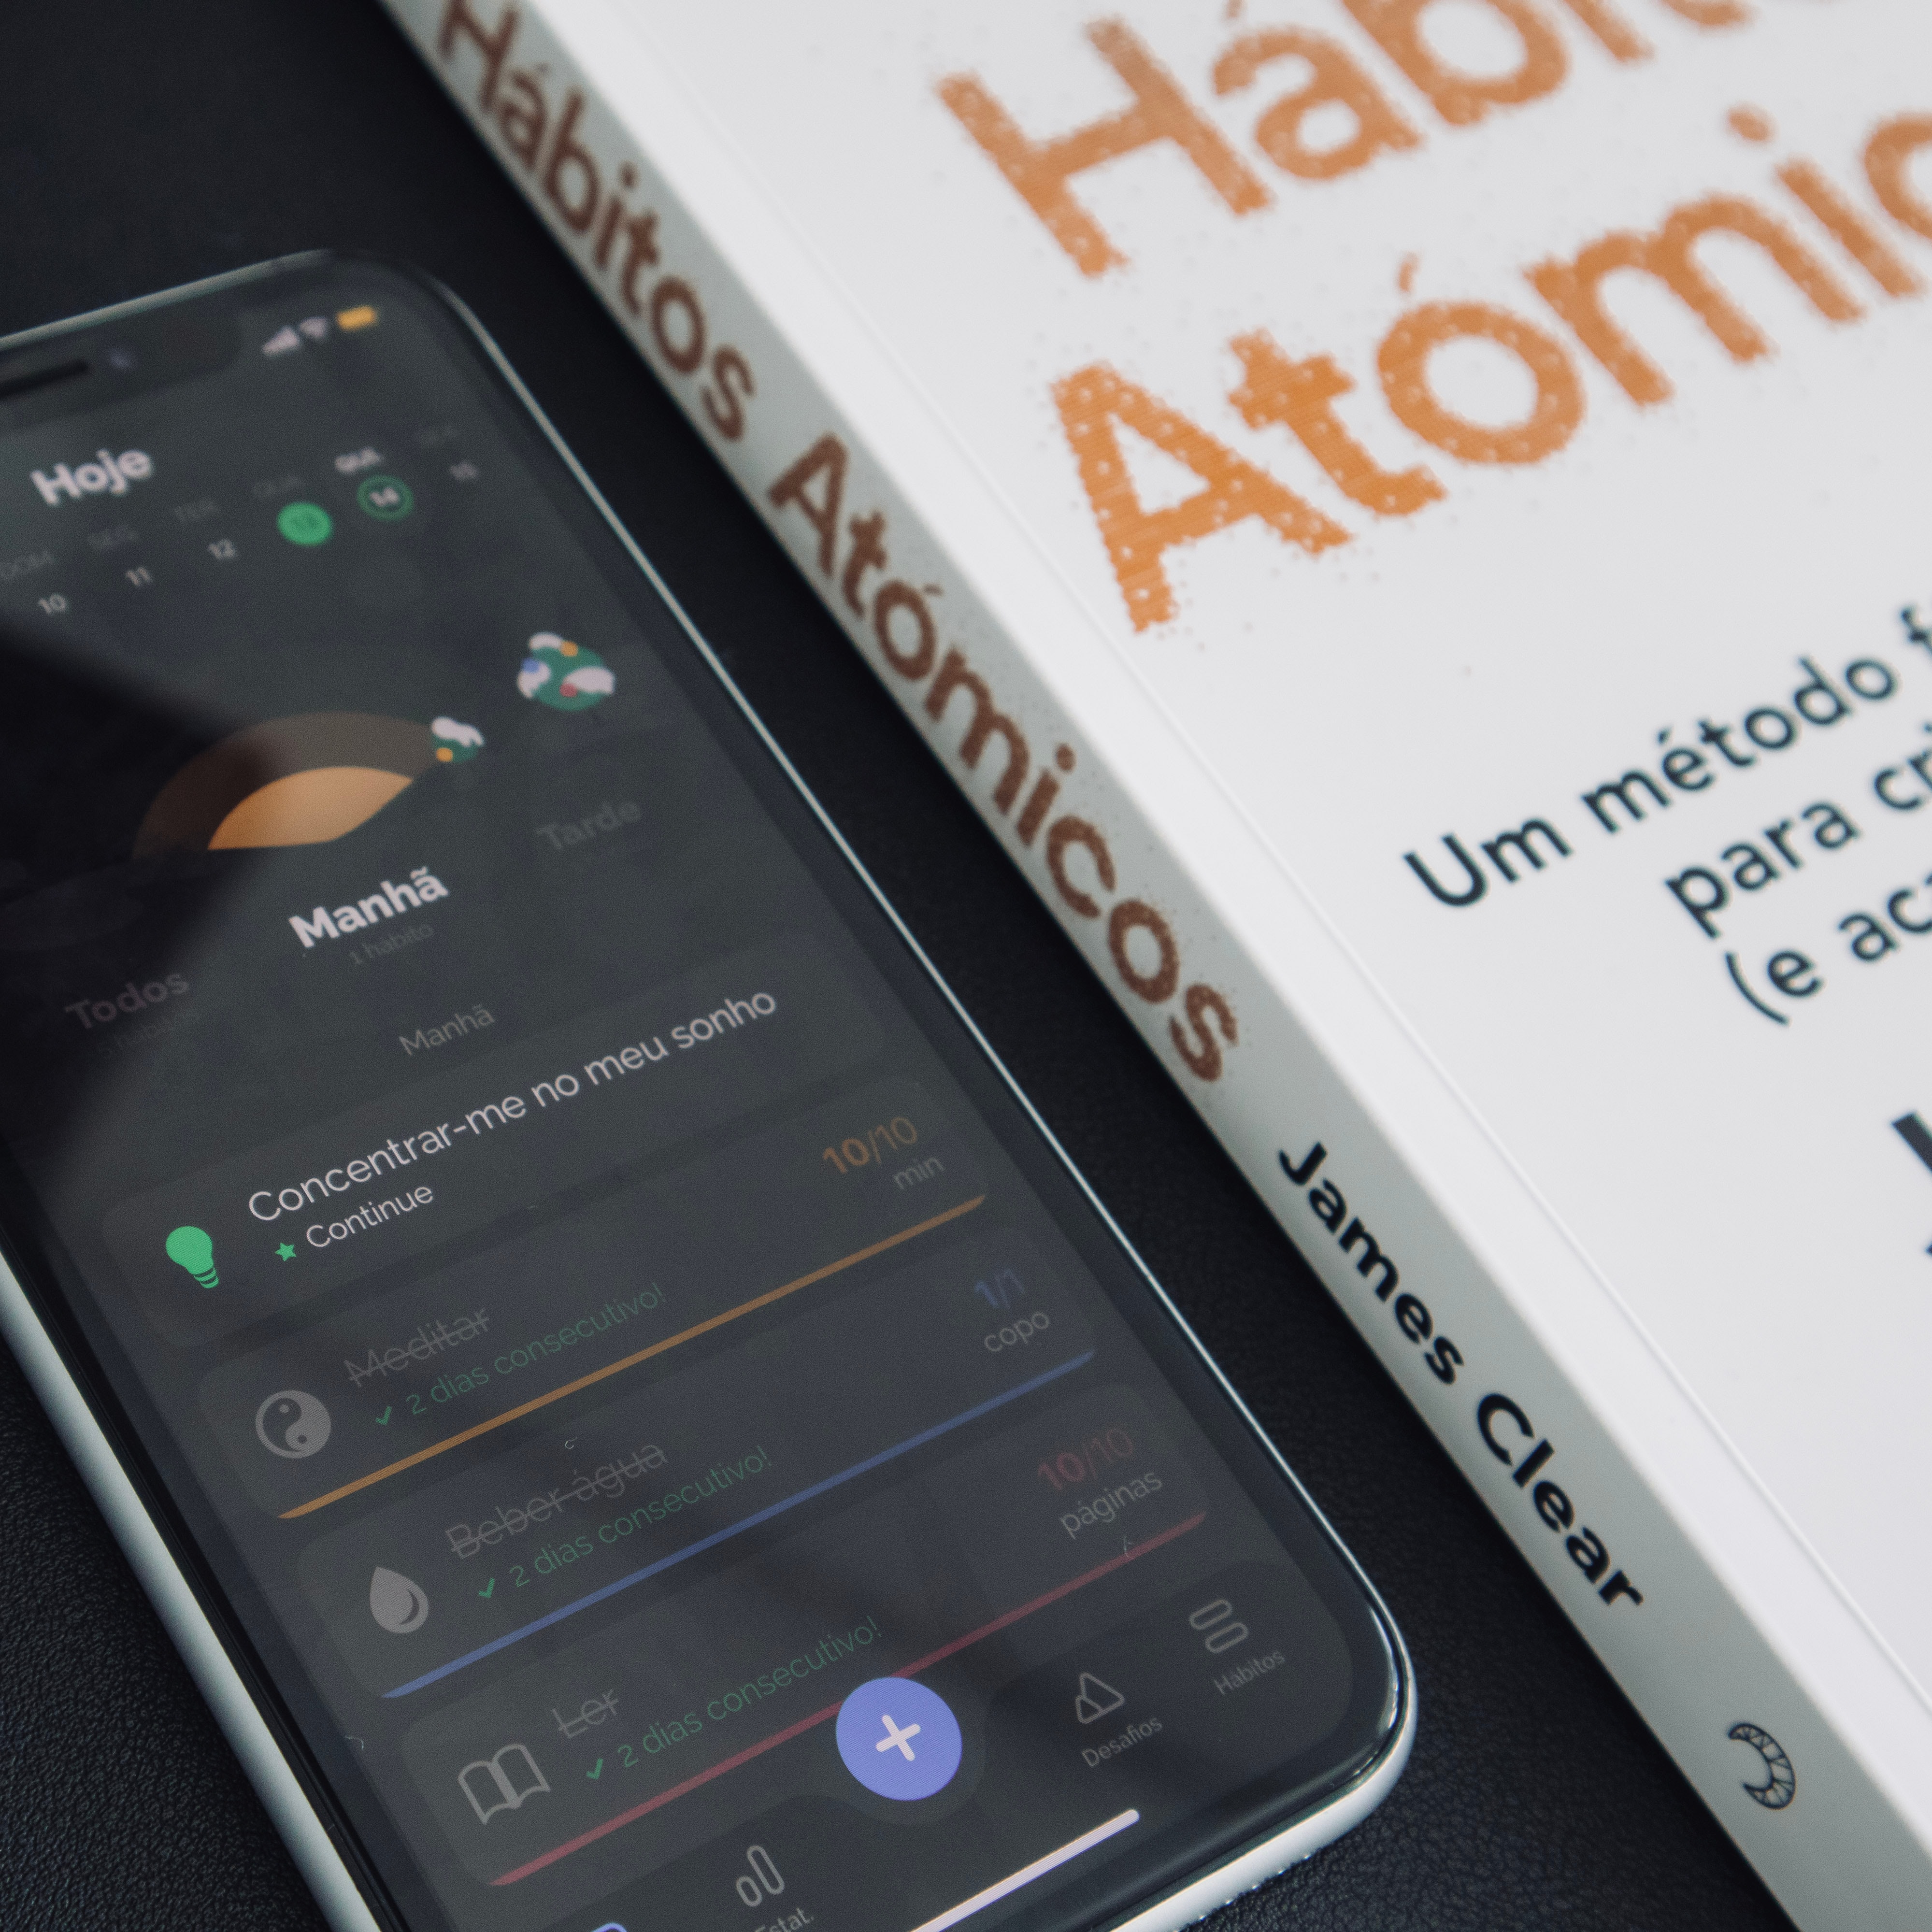 Atomic habits book next to a habit tracker mobile app